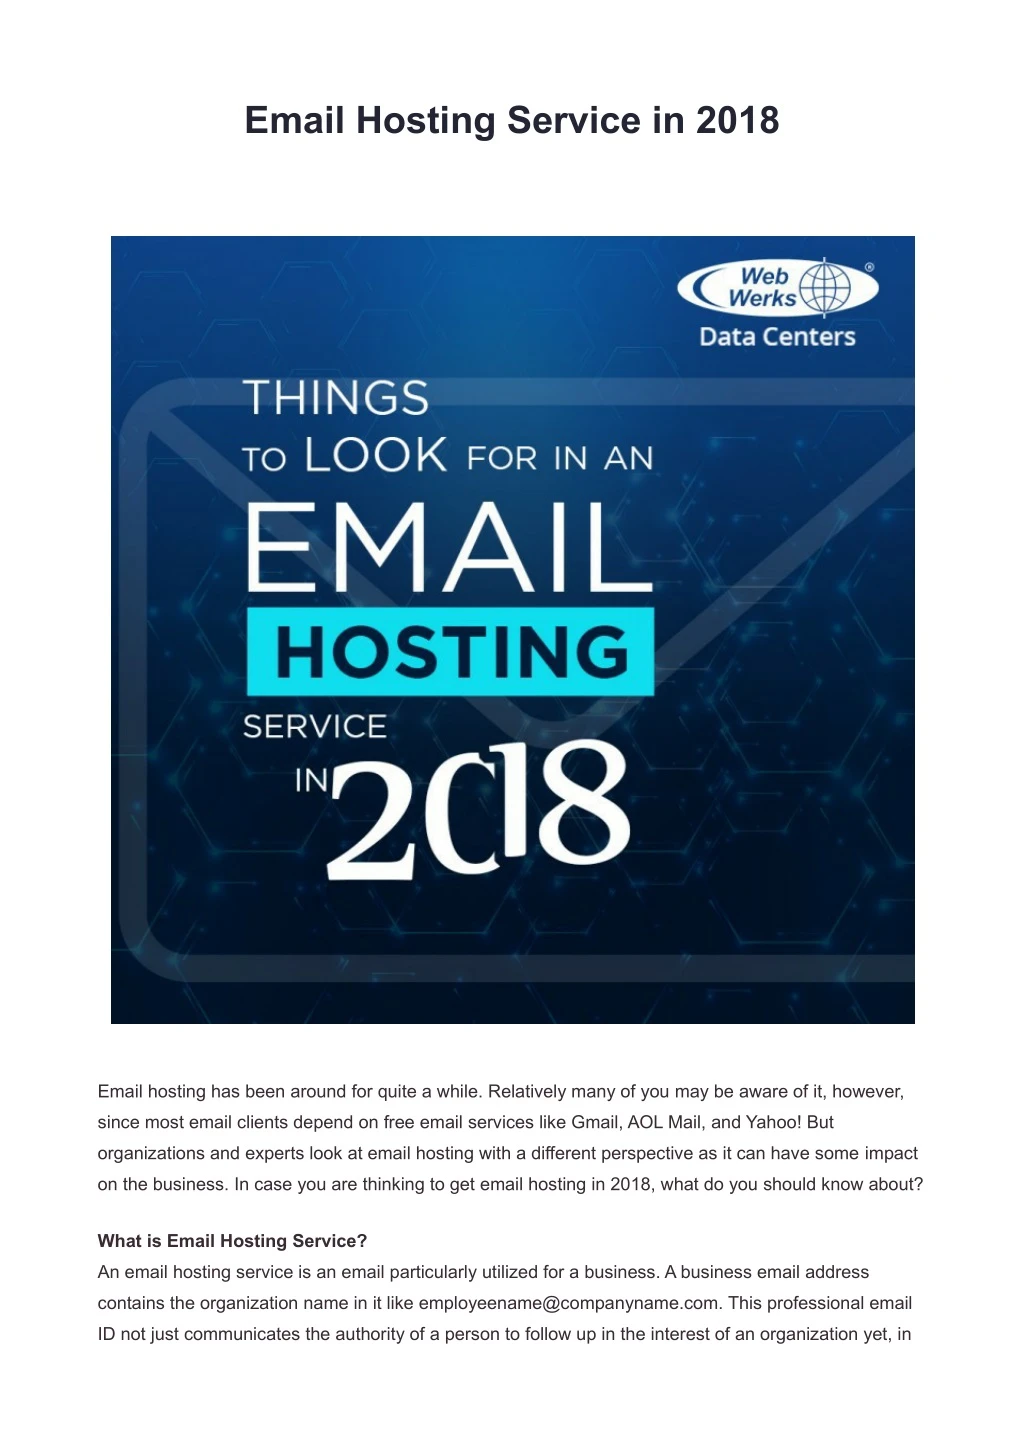 email hosting service in 2018